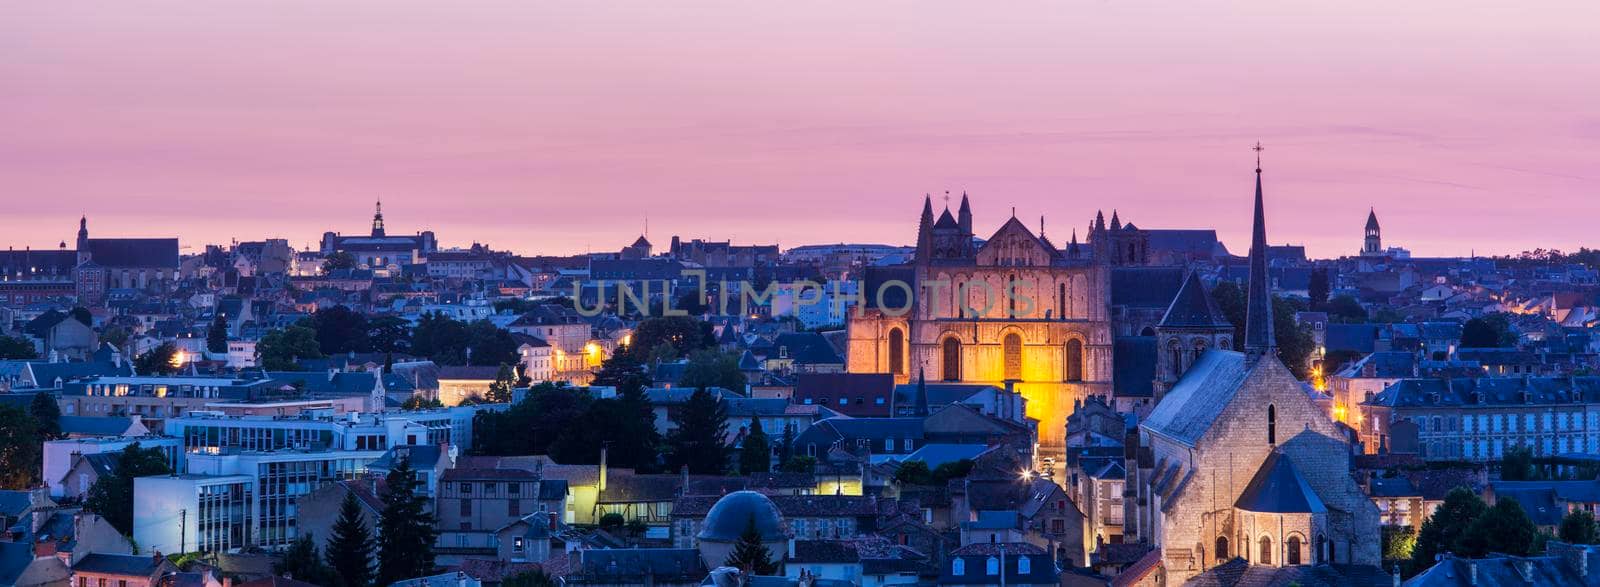 Panorama of Poitiers with Cathedral of Saint Peter at sunset. Poitiers, Nouvelle-Aquitaine, France.